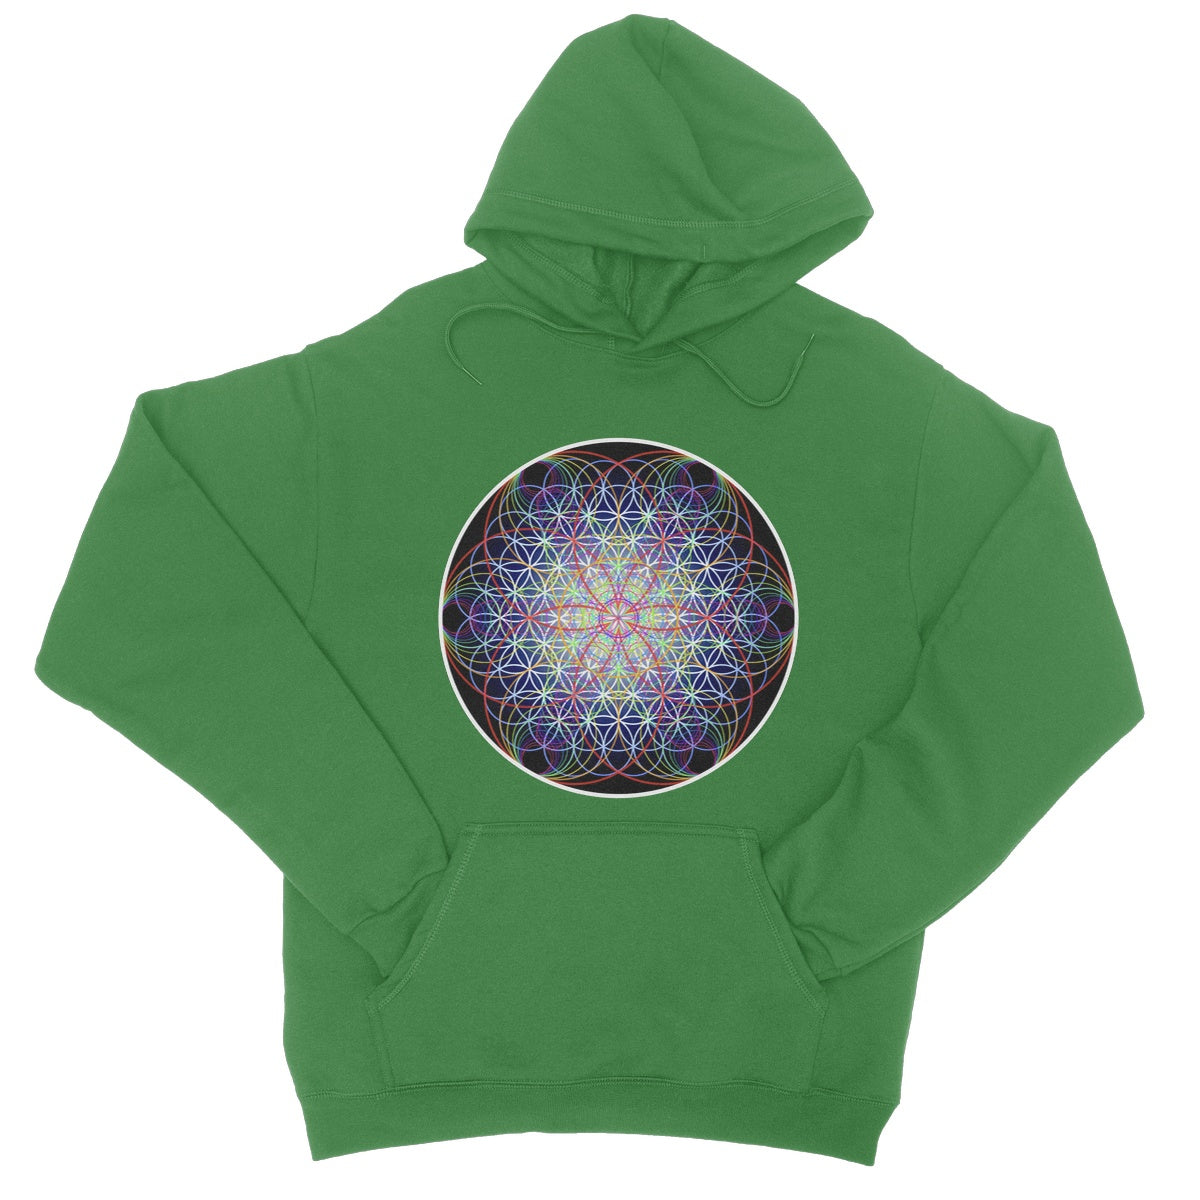 Sound Waves Resonating within the Flower of Life College Hoodie